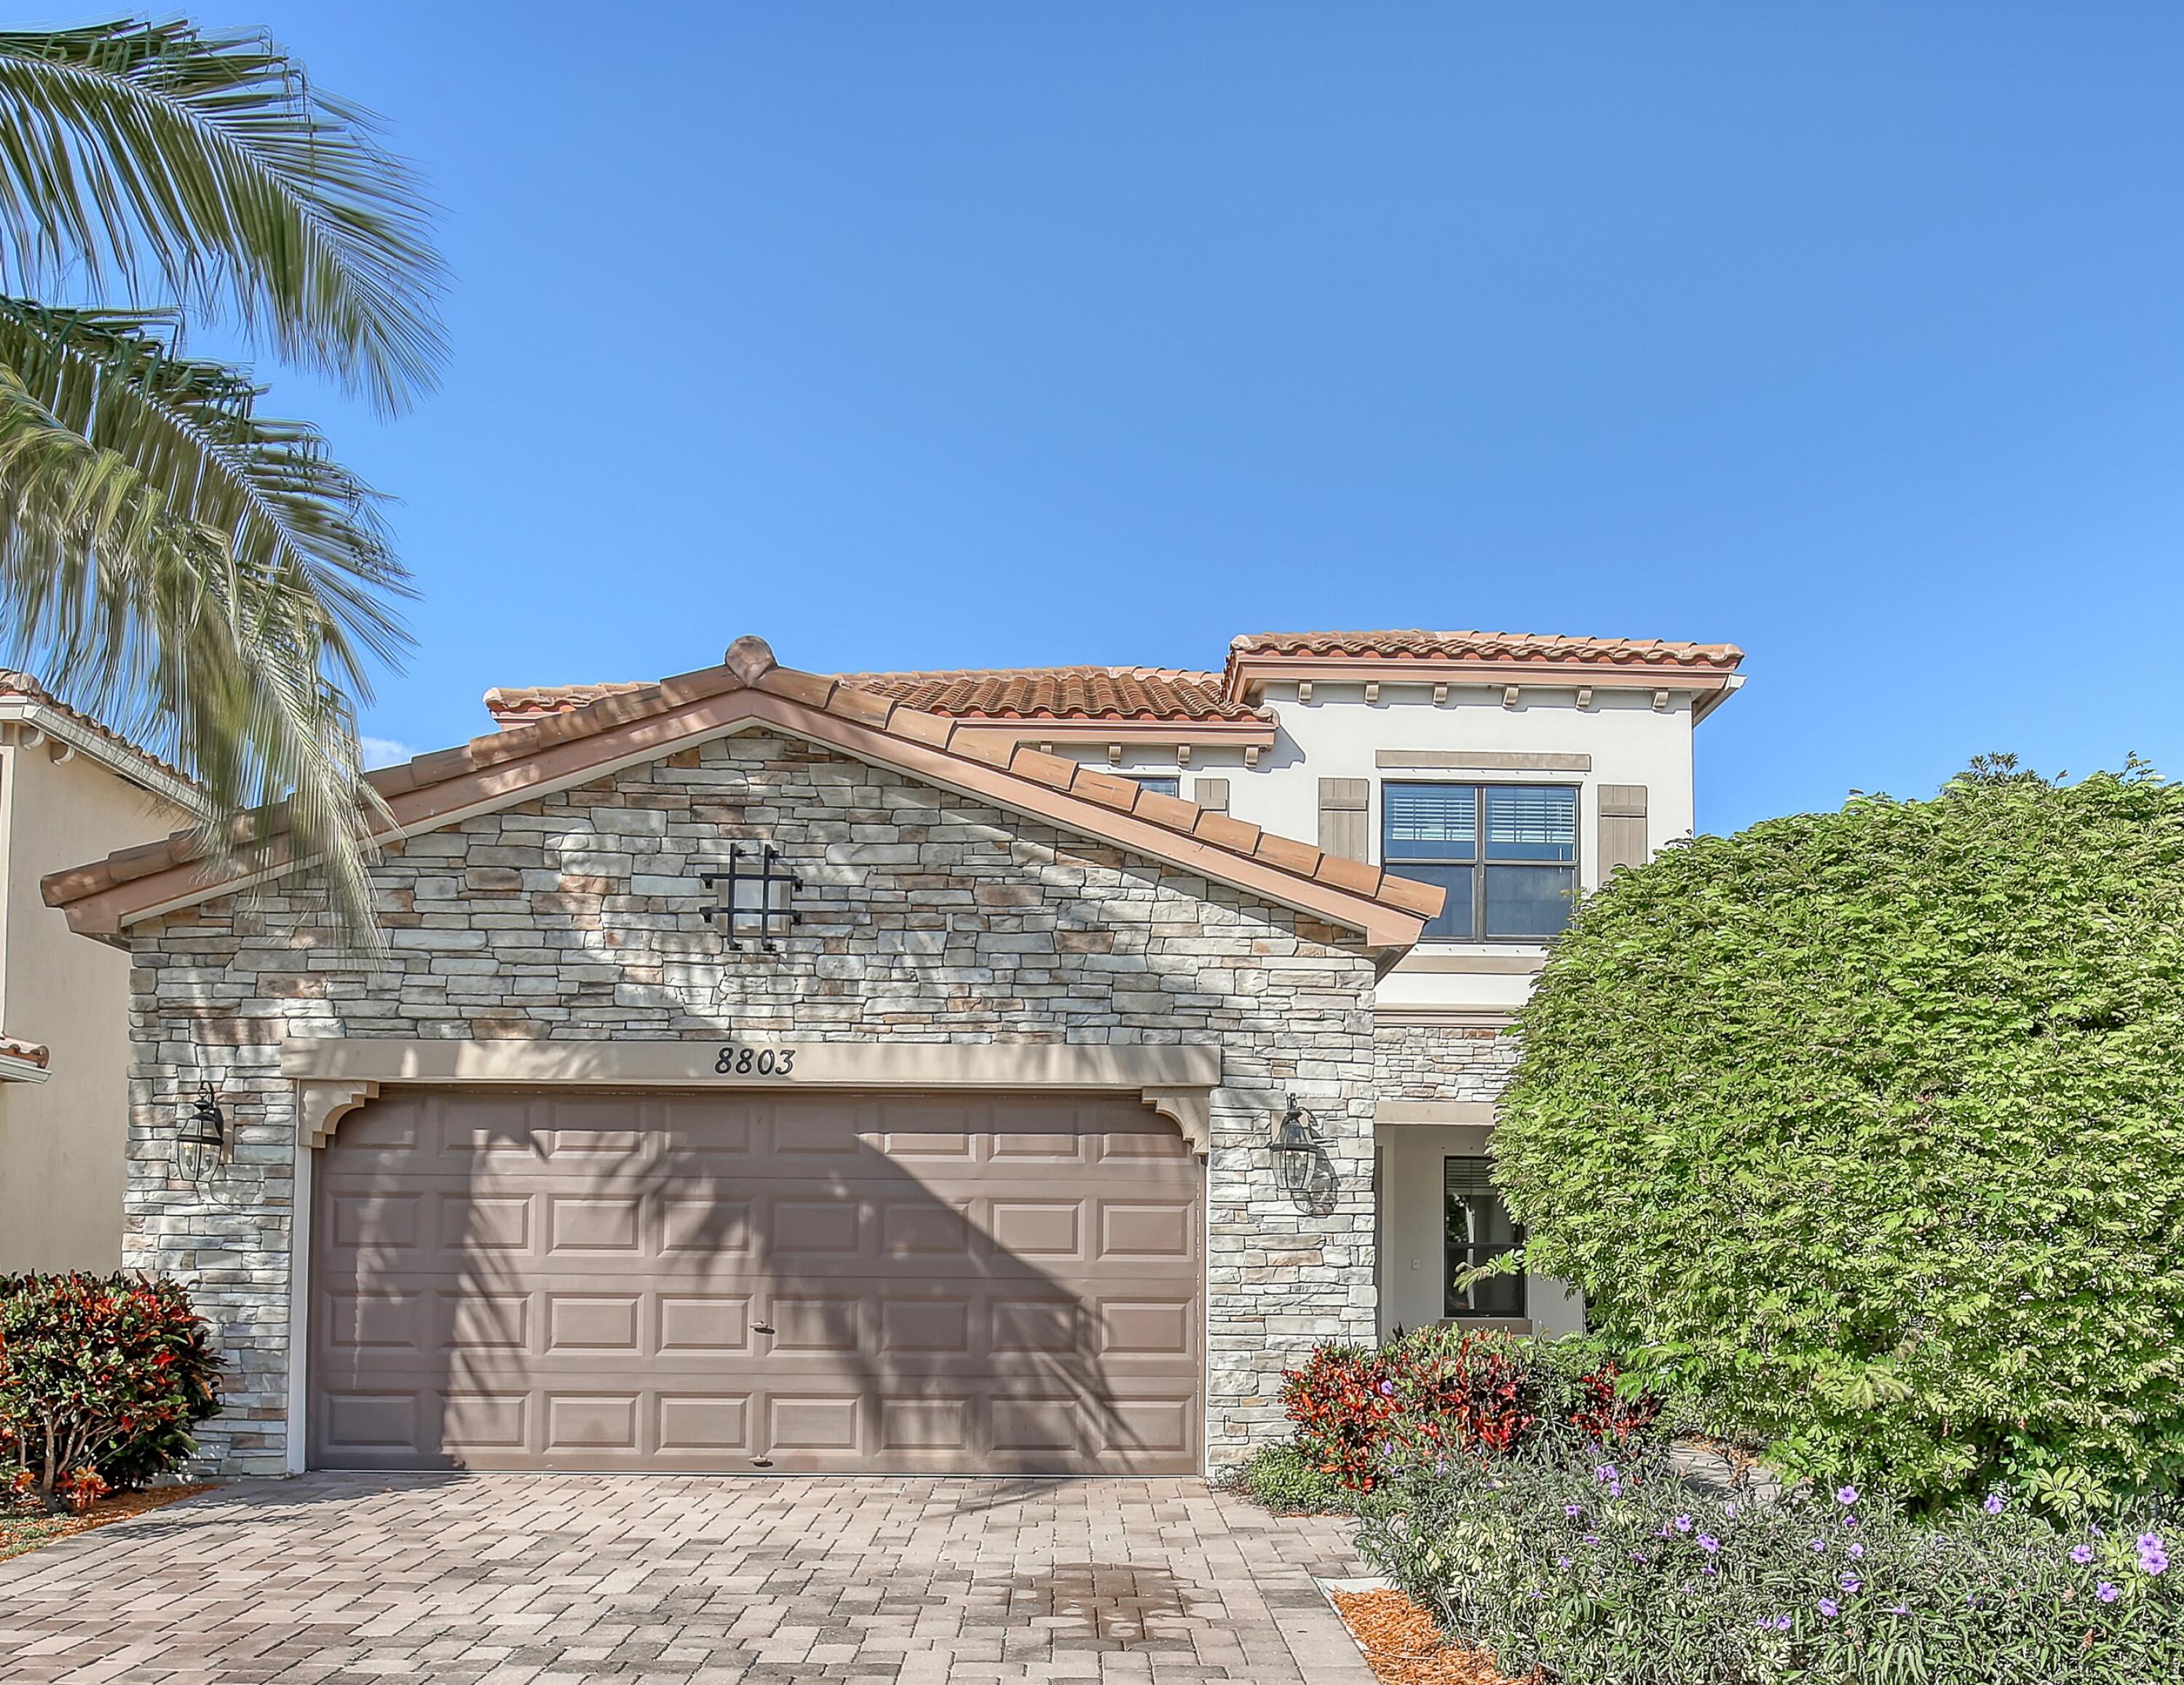 8803 Willow Cove Lane, Lake Worth, Palm Beach County, Florida - 5 Bedrooms  
3 Bathrooms - 